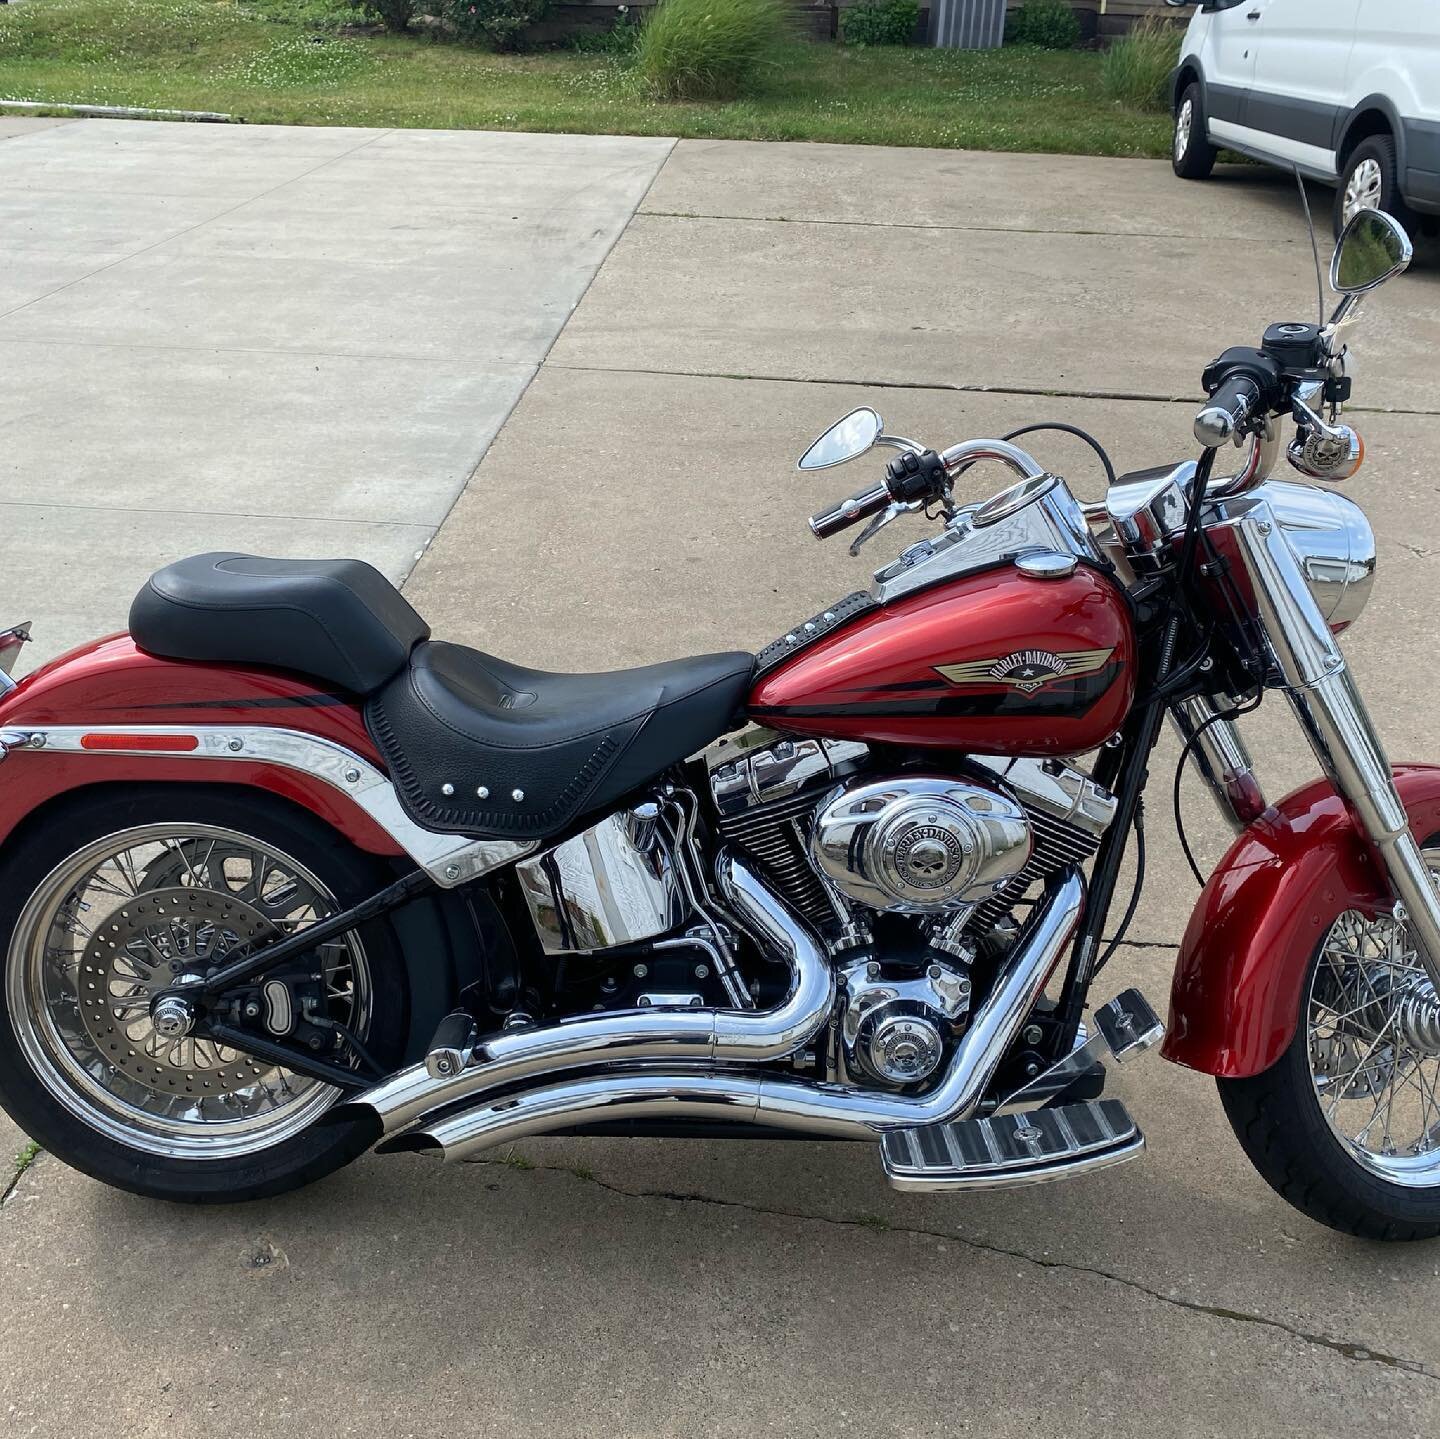 2008 Harley Davidson Fat Boy 
Very Clean and Well Maintained 
Big Bore Kit, Night Prowler Cams, Vance and Hines Exhaust #harleydavidson #fatboy
Race Tuner, Super Fast!
330-854-6932 Worden's Custom Cycle
Asking $10,000 or Best Offer